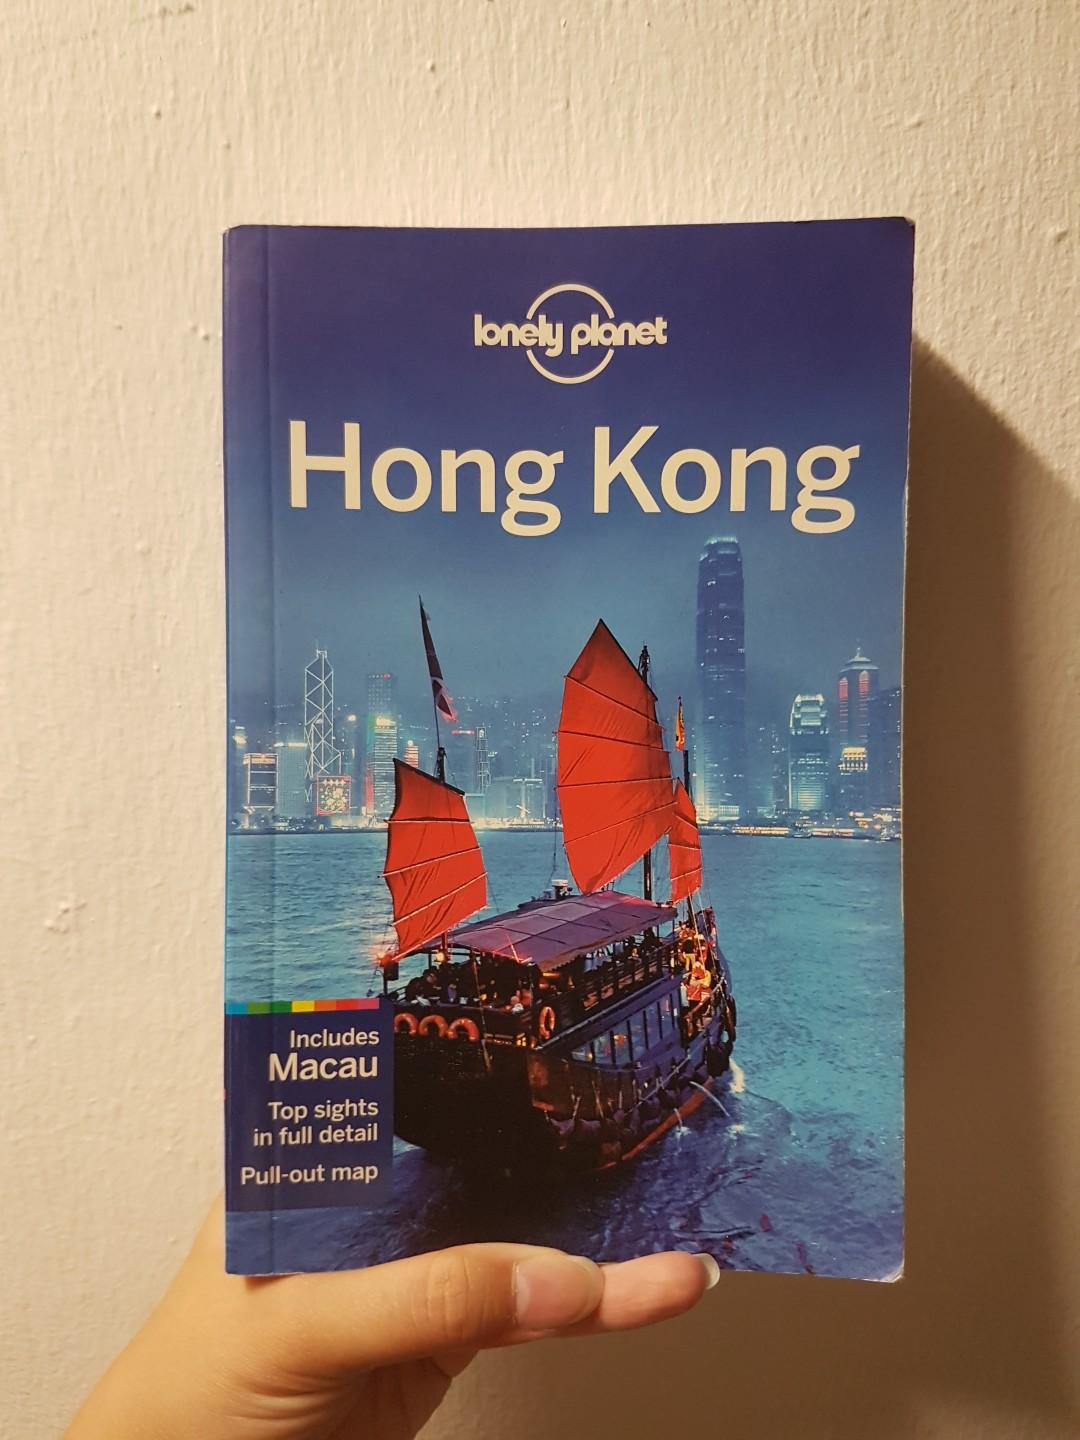 Hobbies　Carousell　Non-Fiction　Planet　Guide,　Hong　Travel　on　Magazines,　Fiction　Toys,　Kong　Lonely　Books